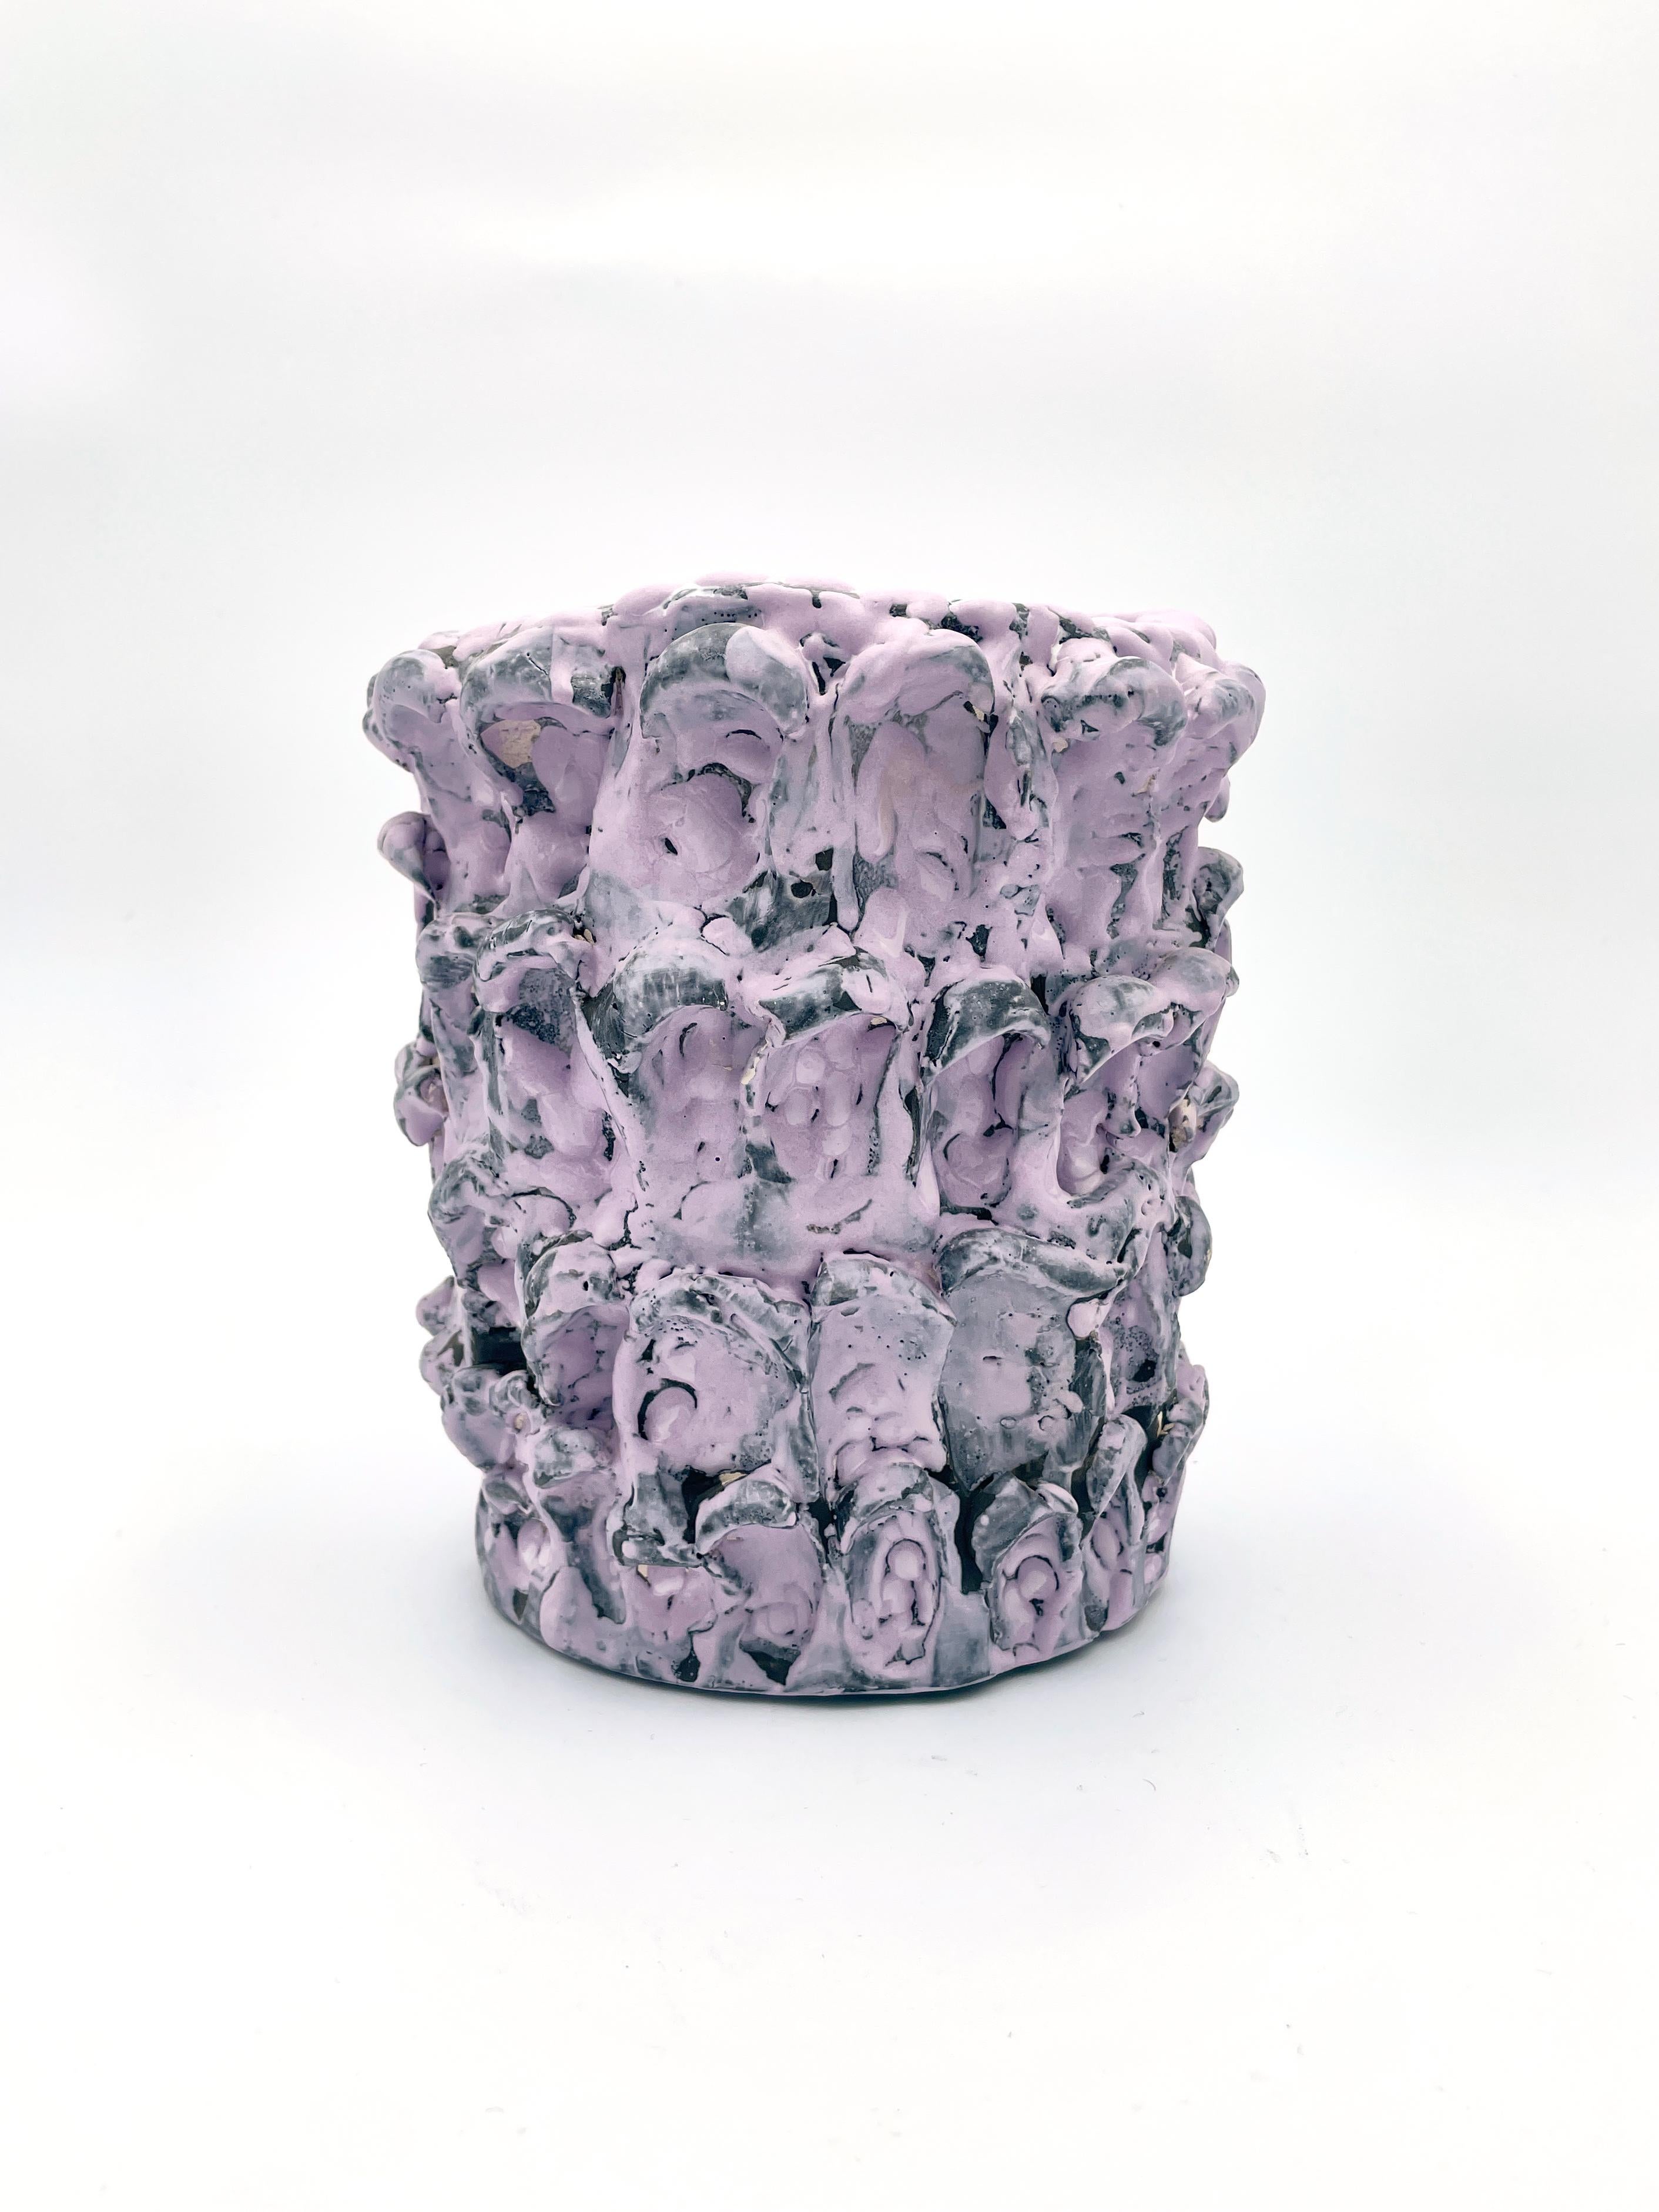 Organic Modern Onda Vase, Lilac Bubble and Opaque Black 01 For Sale